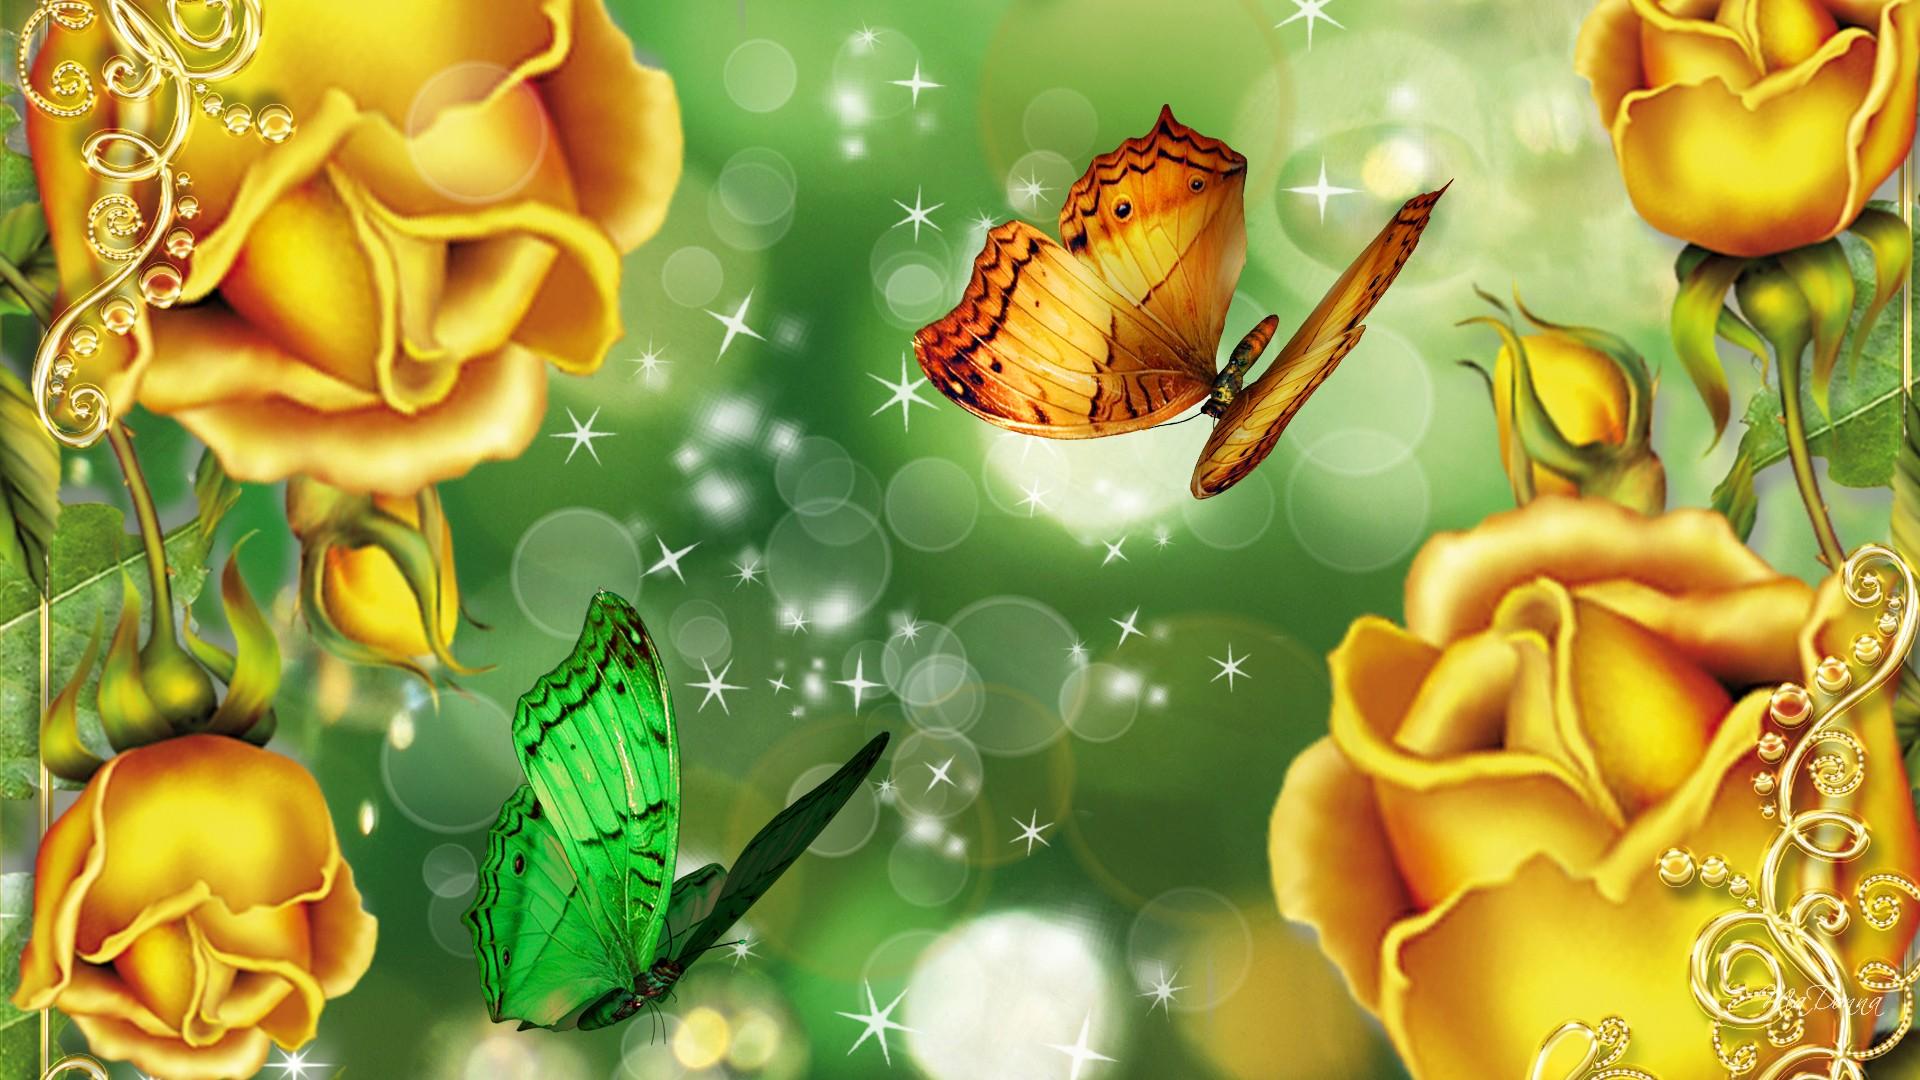 GREEN AND GOLD WALLPAPER - (#77409) - HD Wallpapers ...